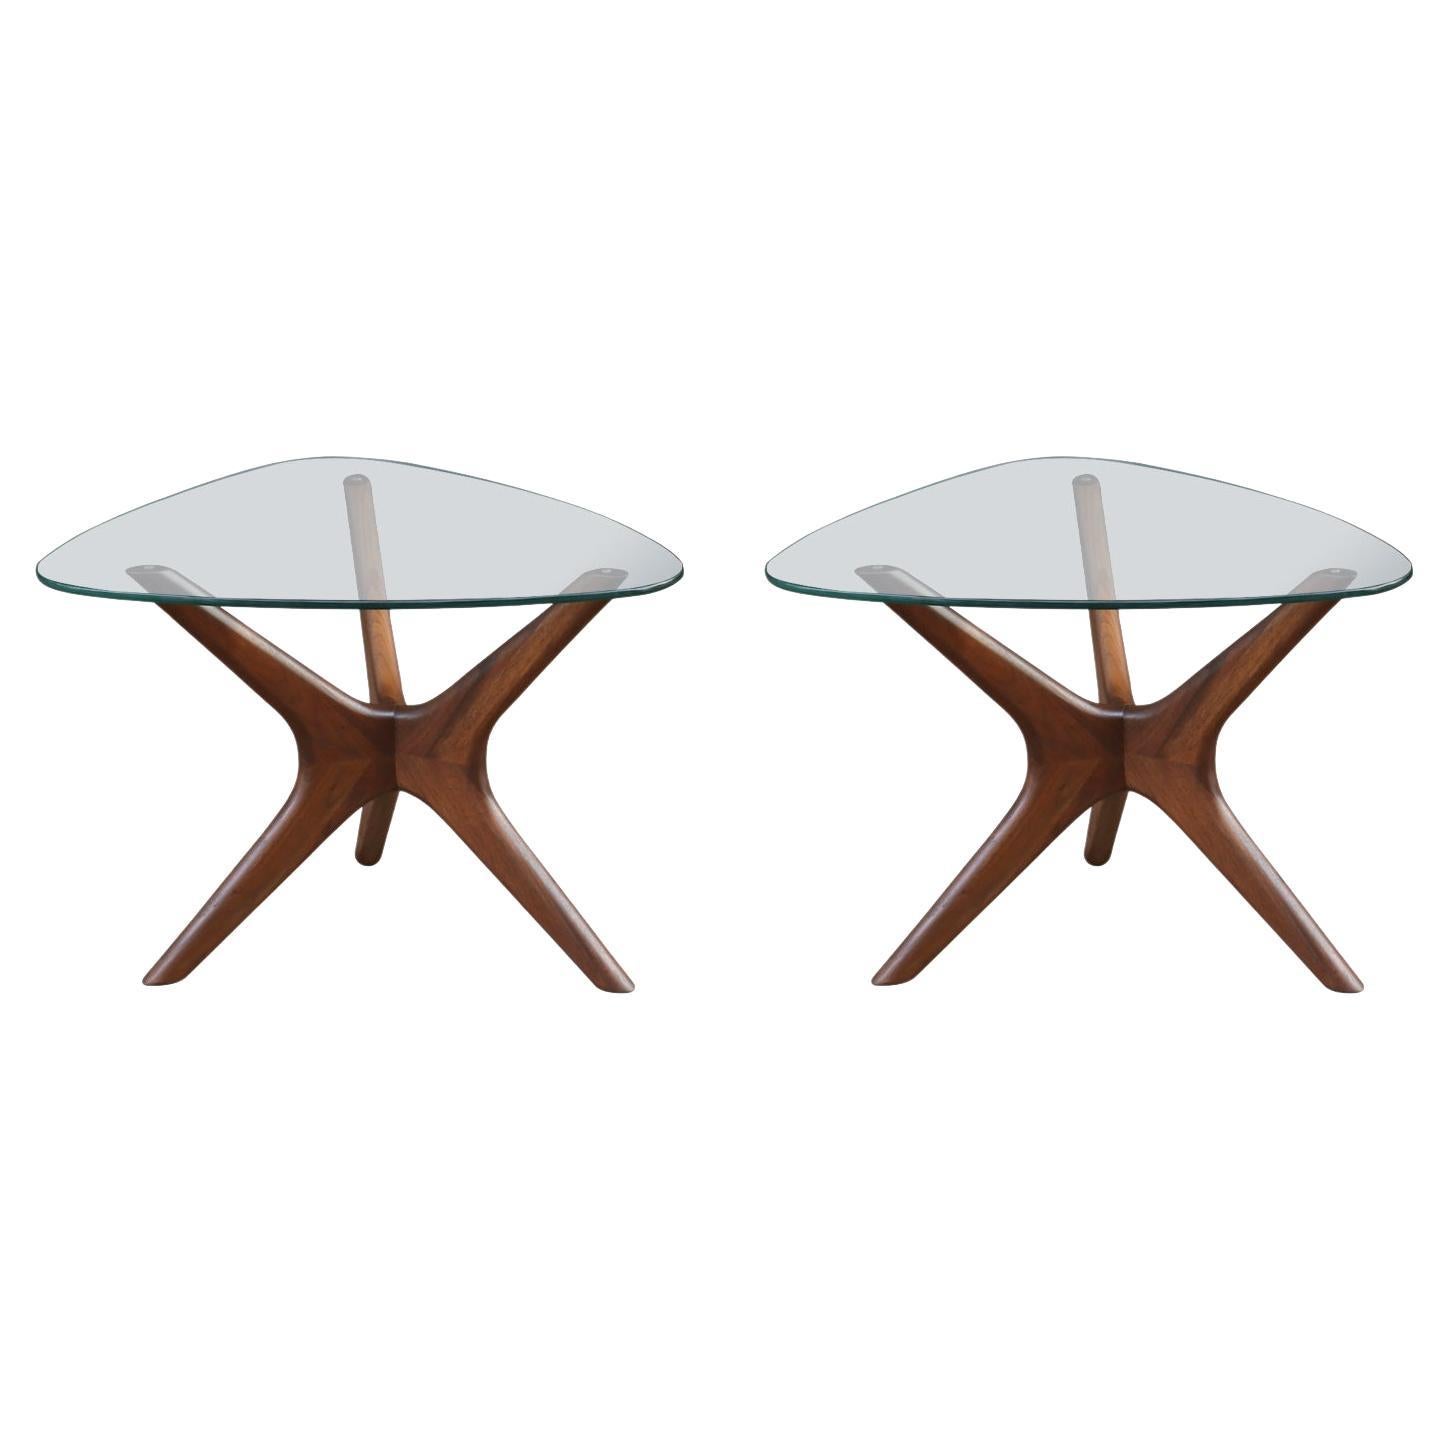 Expertly Restored - Adrian Pearsall "Jax" Sculpted Walnut Side Tables